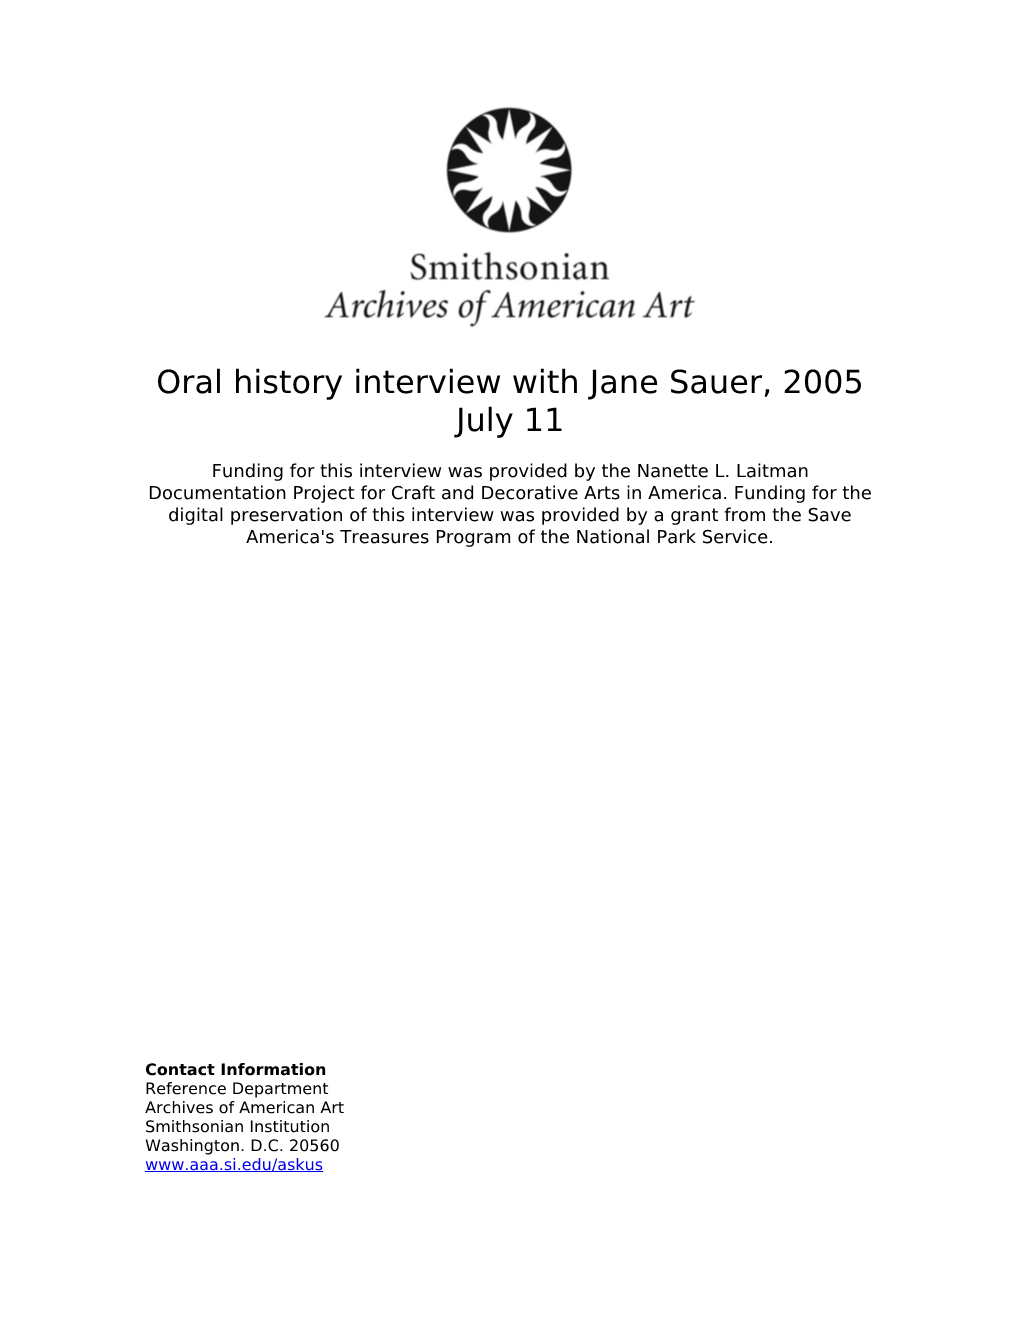 Oral History Interview with Jane Sauer, 2005 July 11